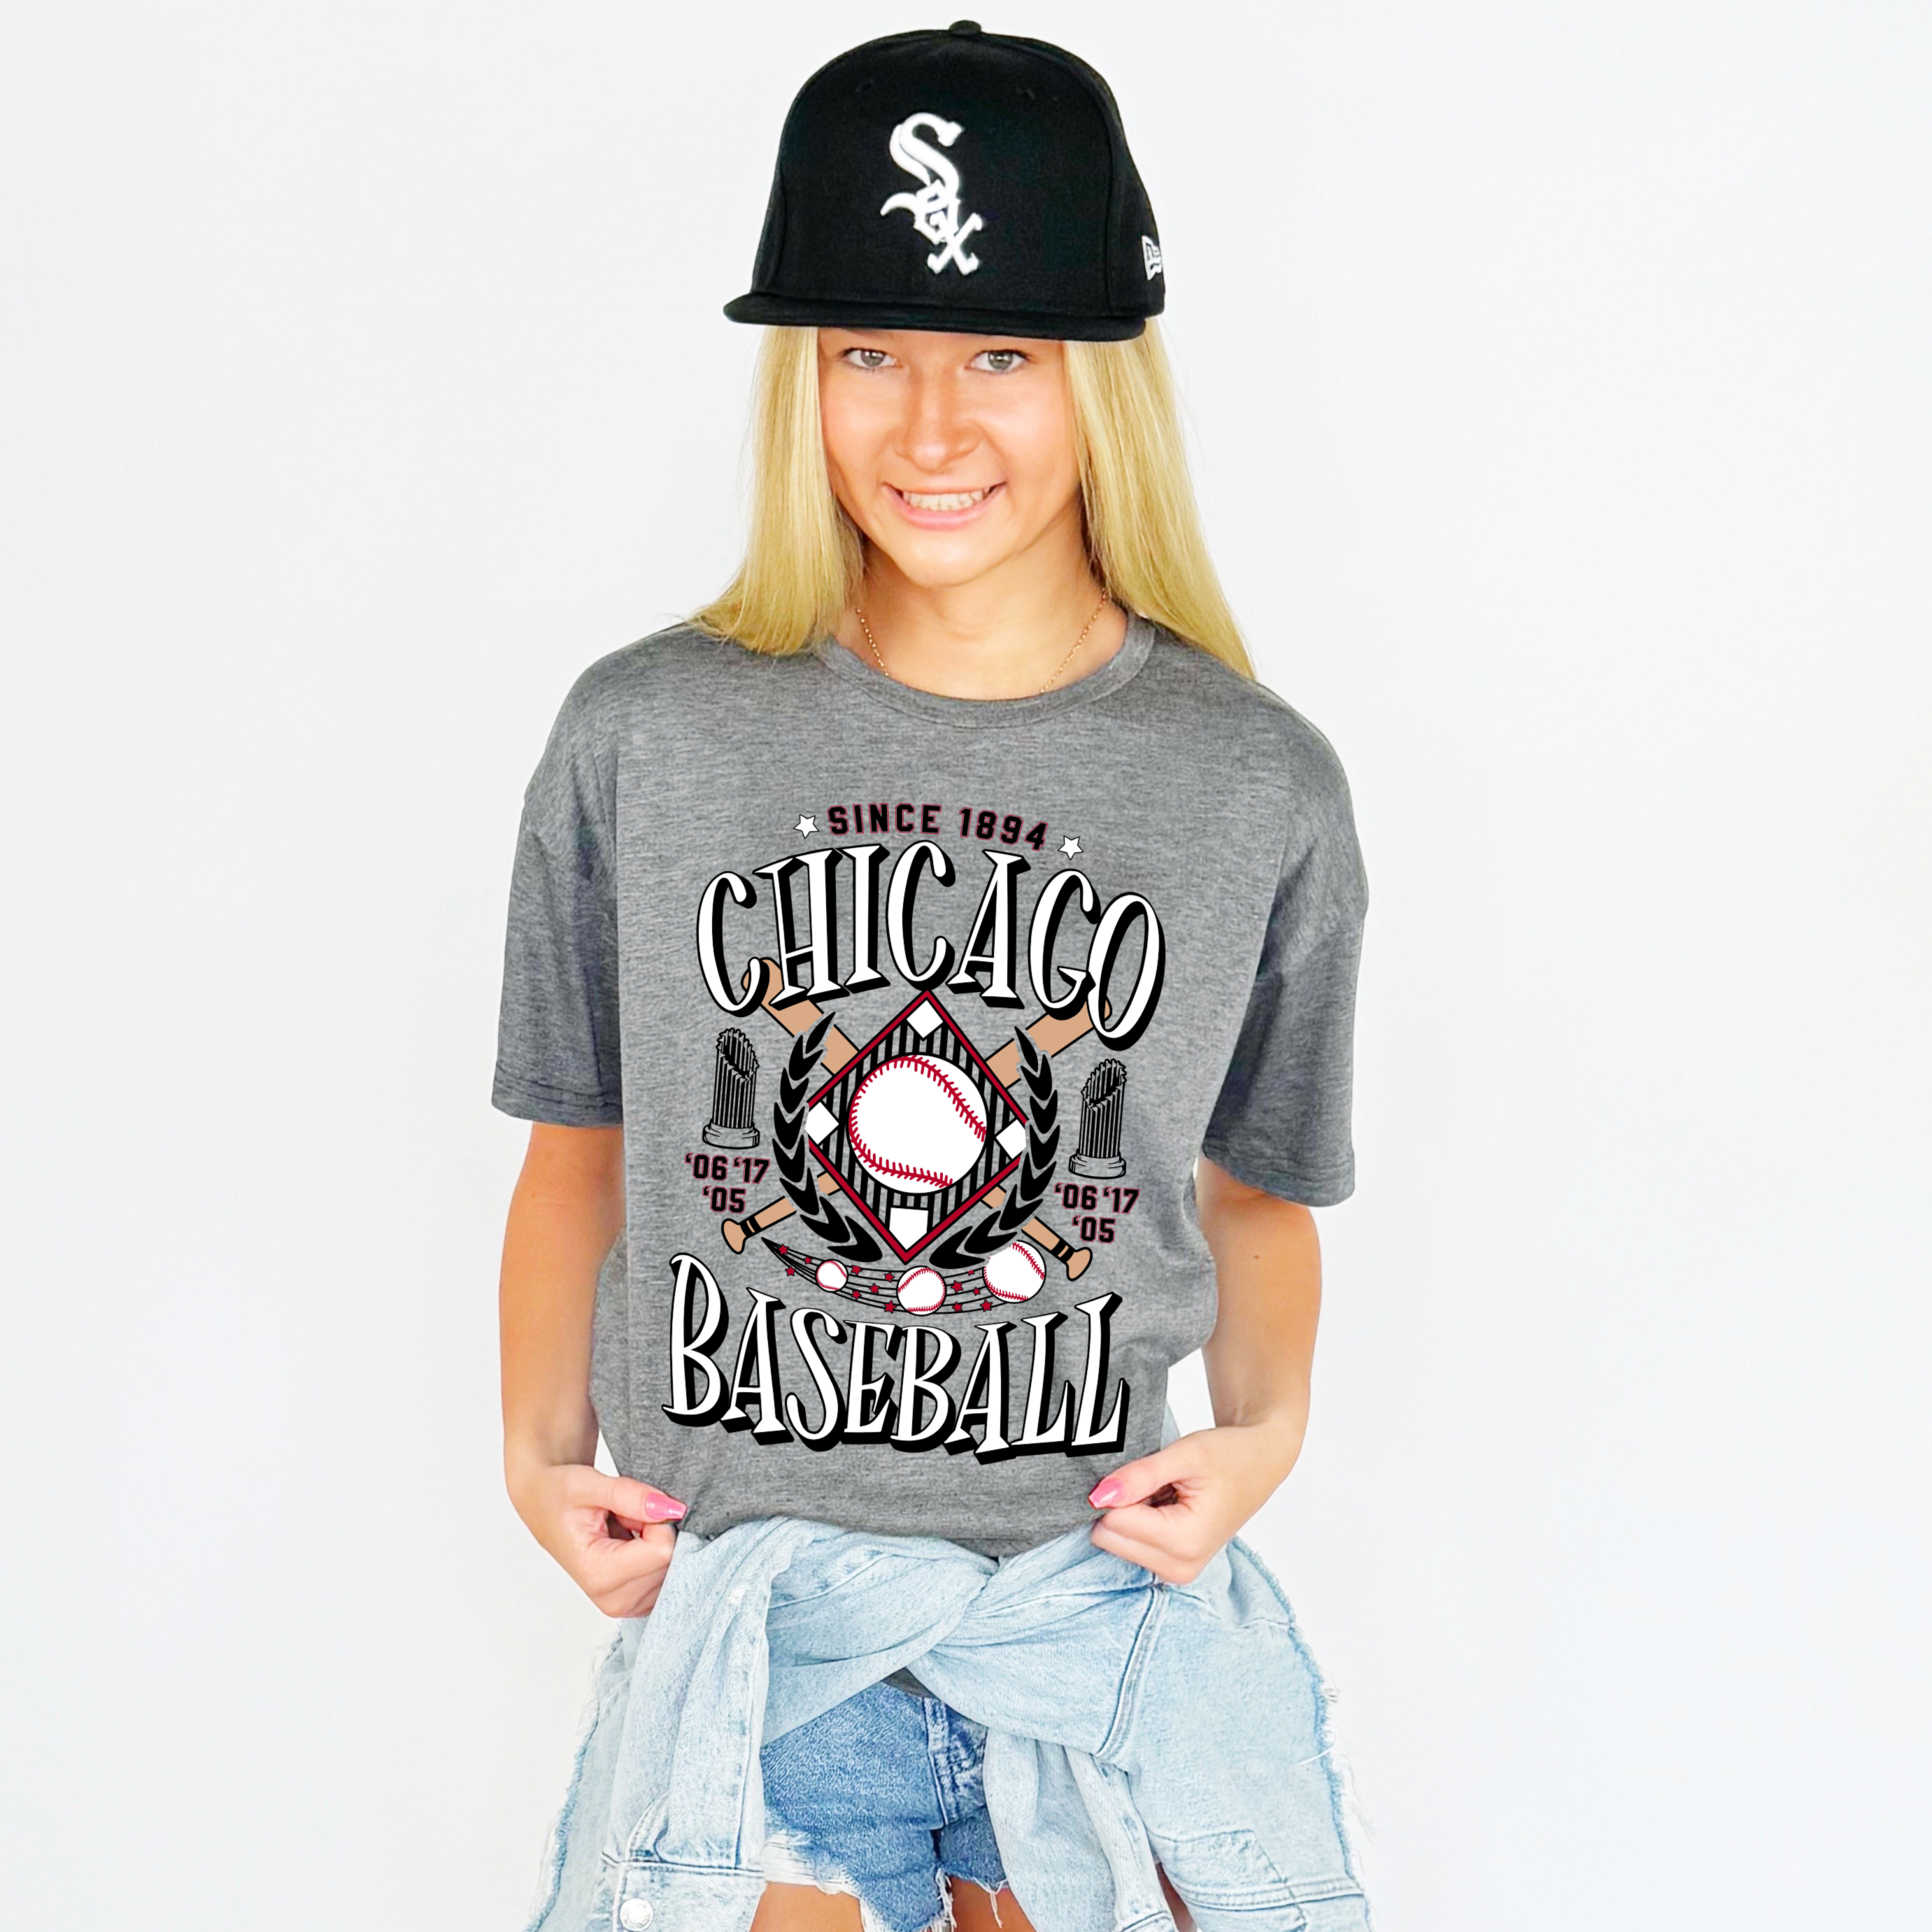 Chicago White Sox Inspired Baseball Team Youth & Adult tee